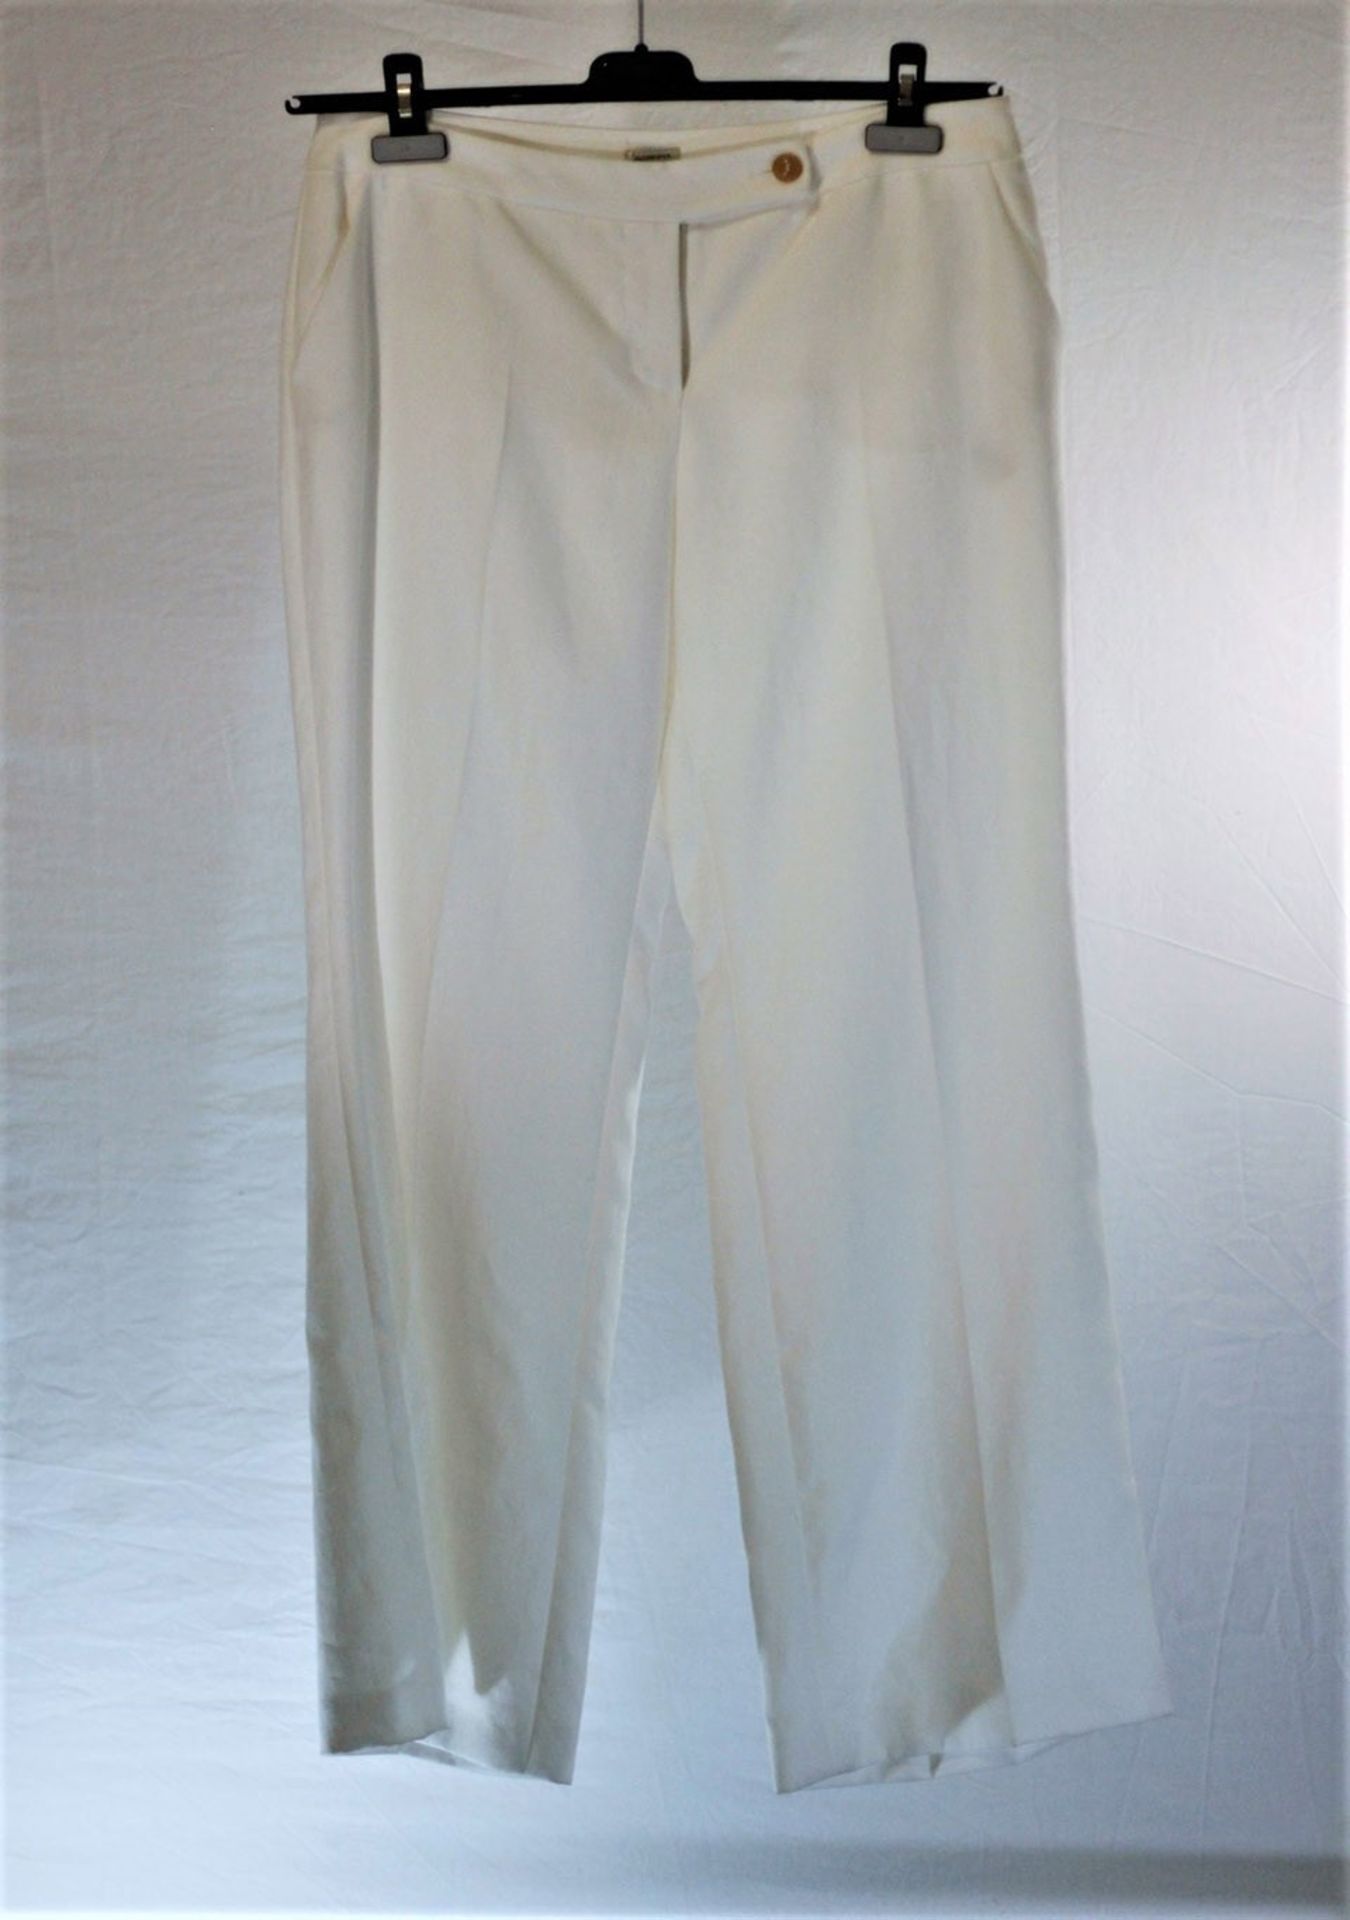 1 x Agnona White Trousers - Size: 16 - Material: 100% Ramie. Lining 52% Viscose, 48% Cotton - From a - Image 7 of 7